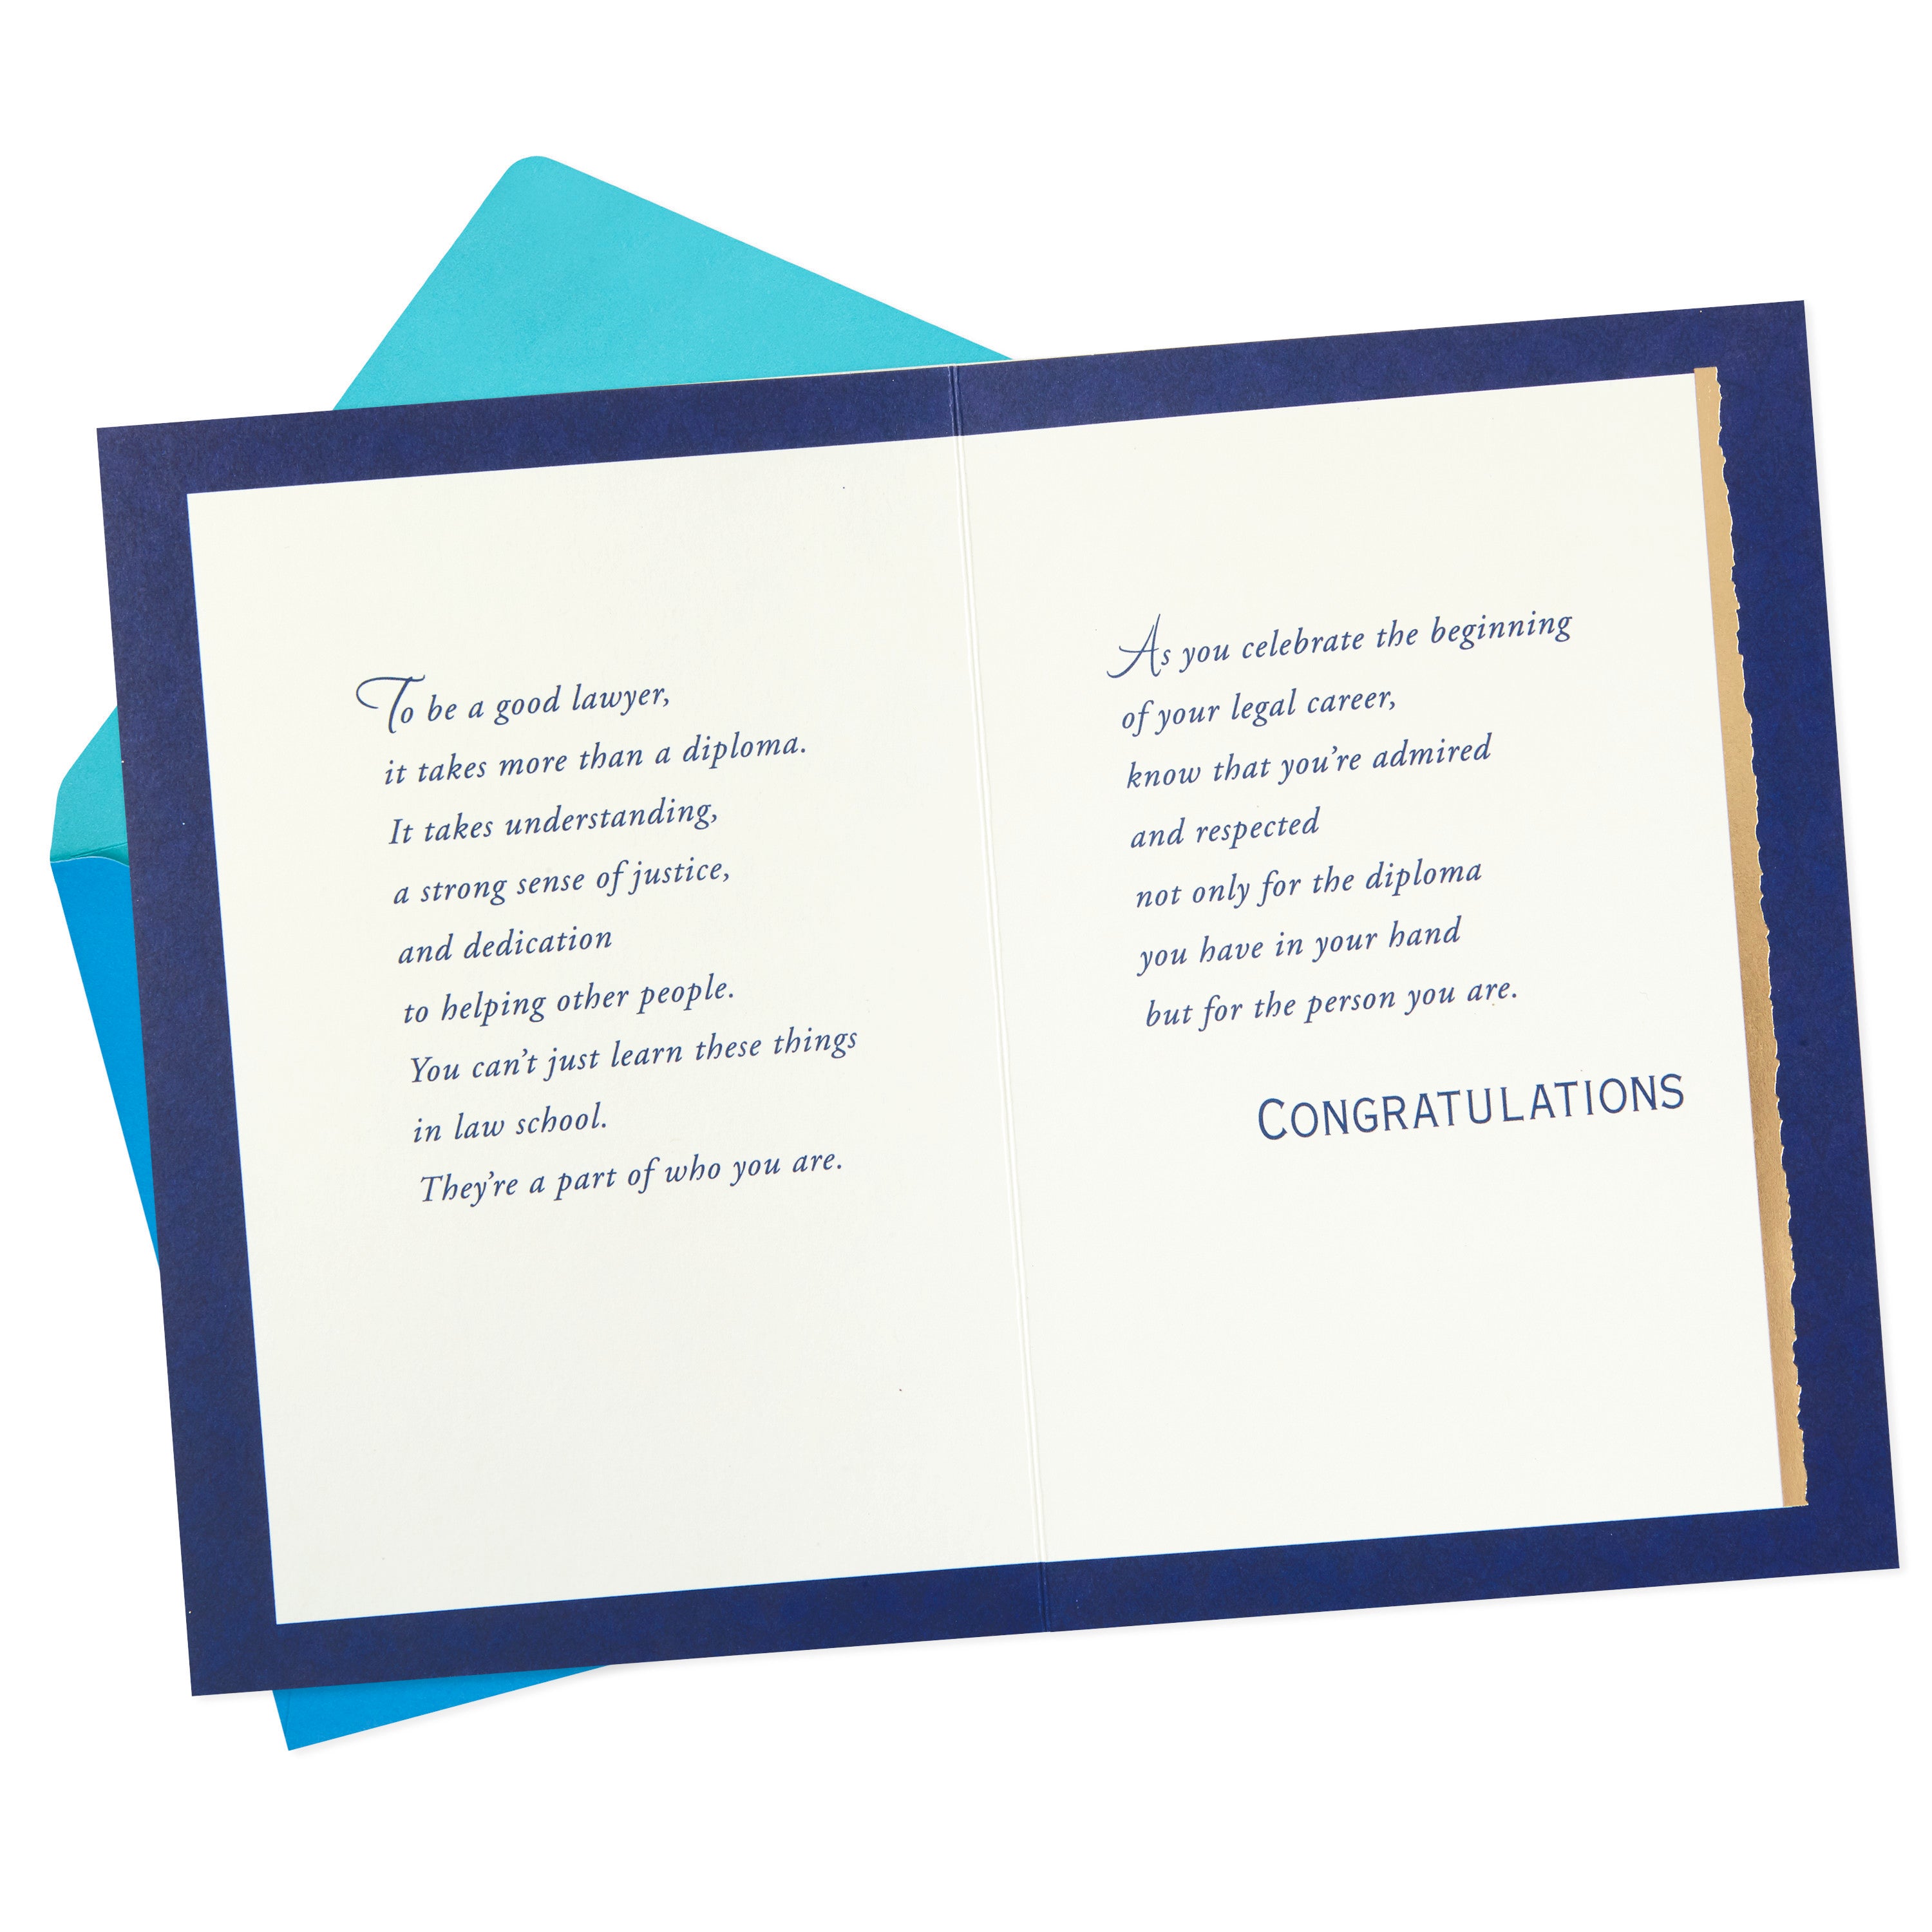 Law School Graduation Card (To Be a Good Lawyer)